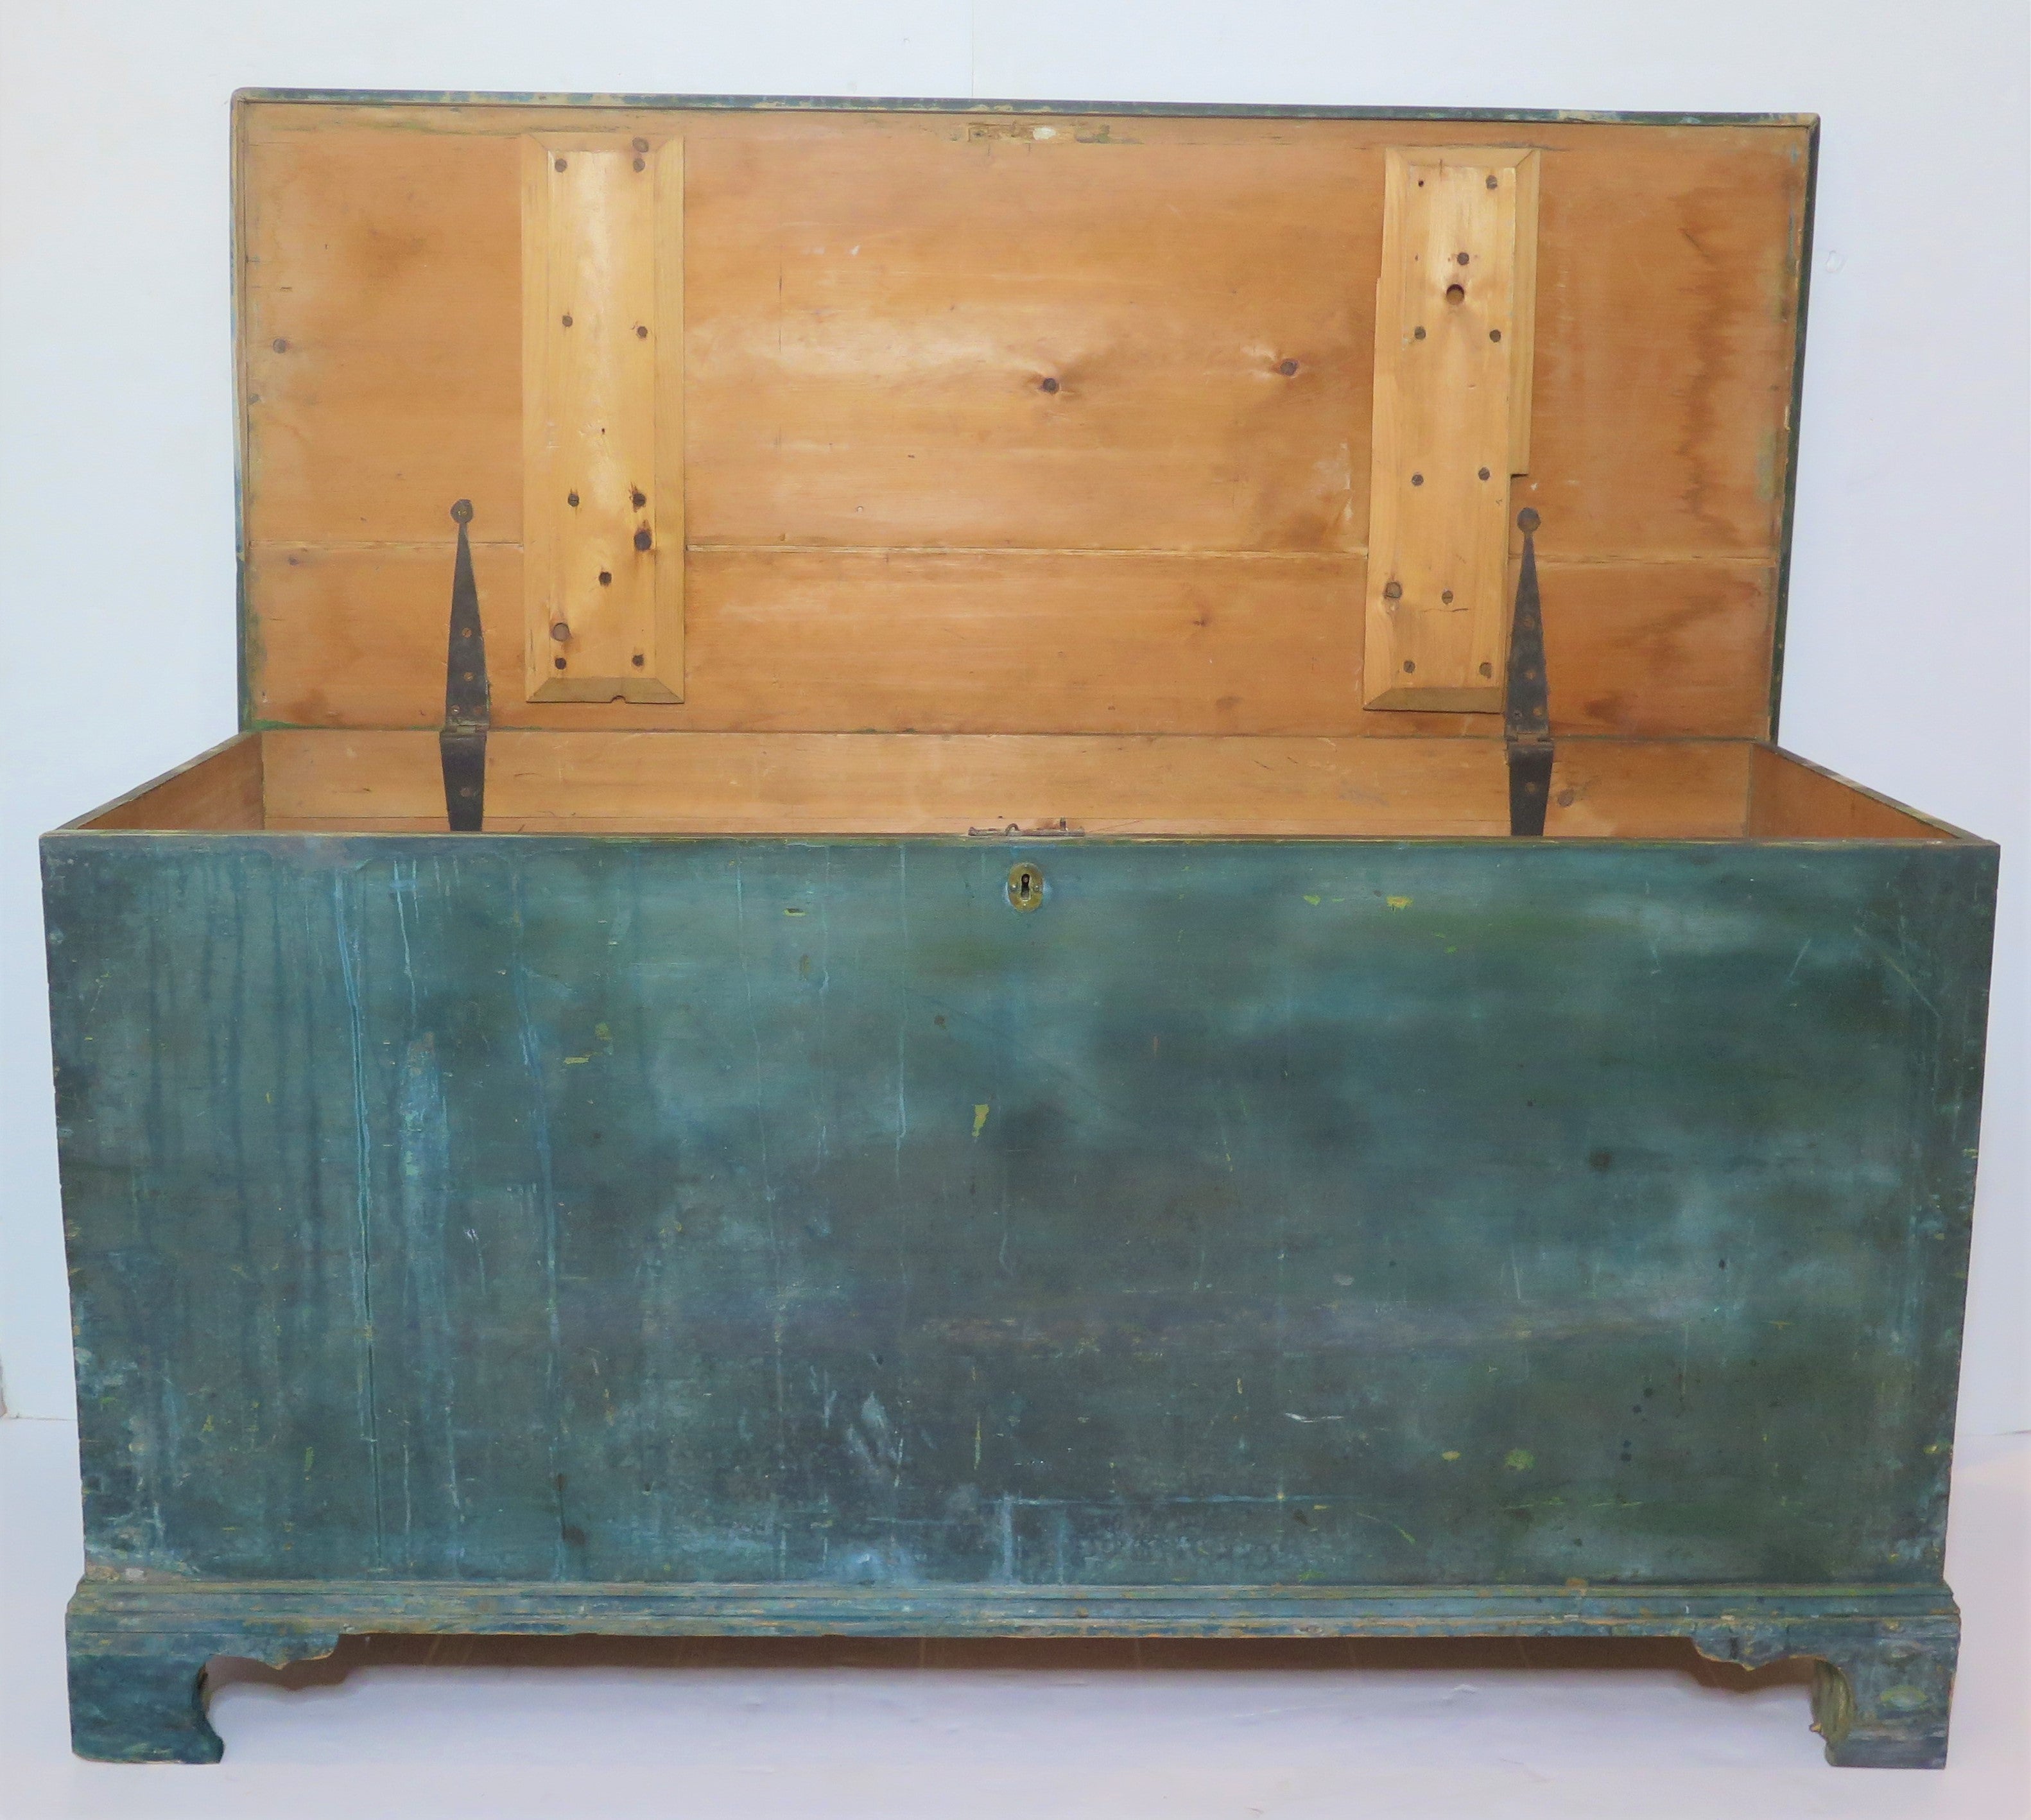 Swedish Painted Chest with Original Green Paint